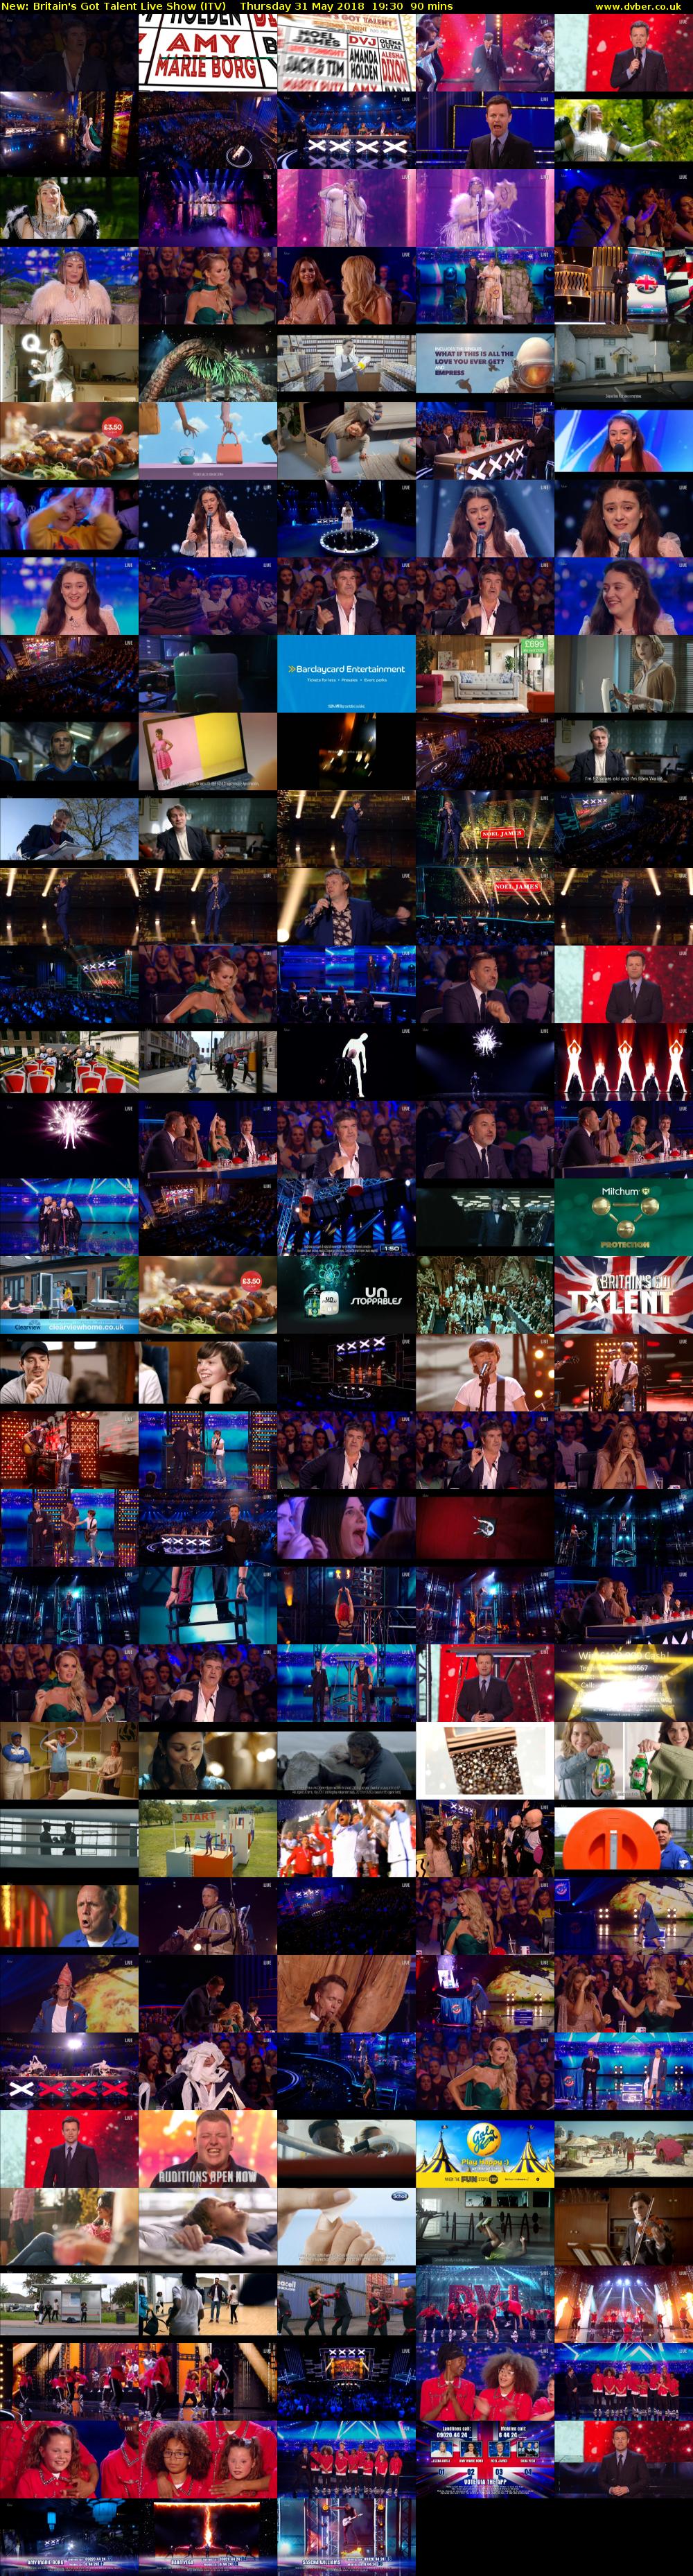 Britain's Got Talent Live Show (ITV) Thursday 31 May 2018 19:30 - 21:00